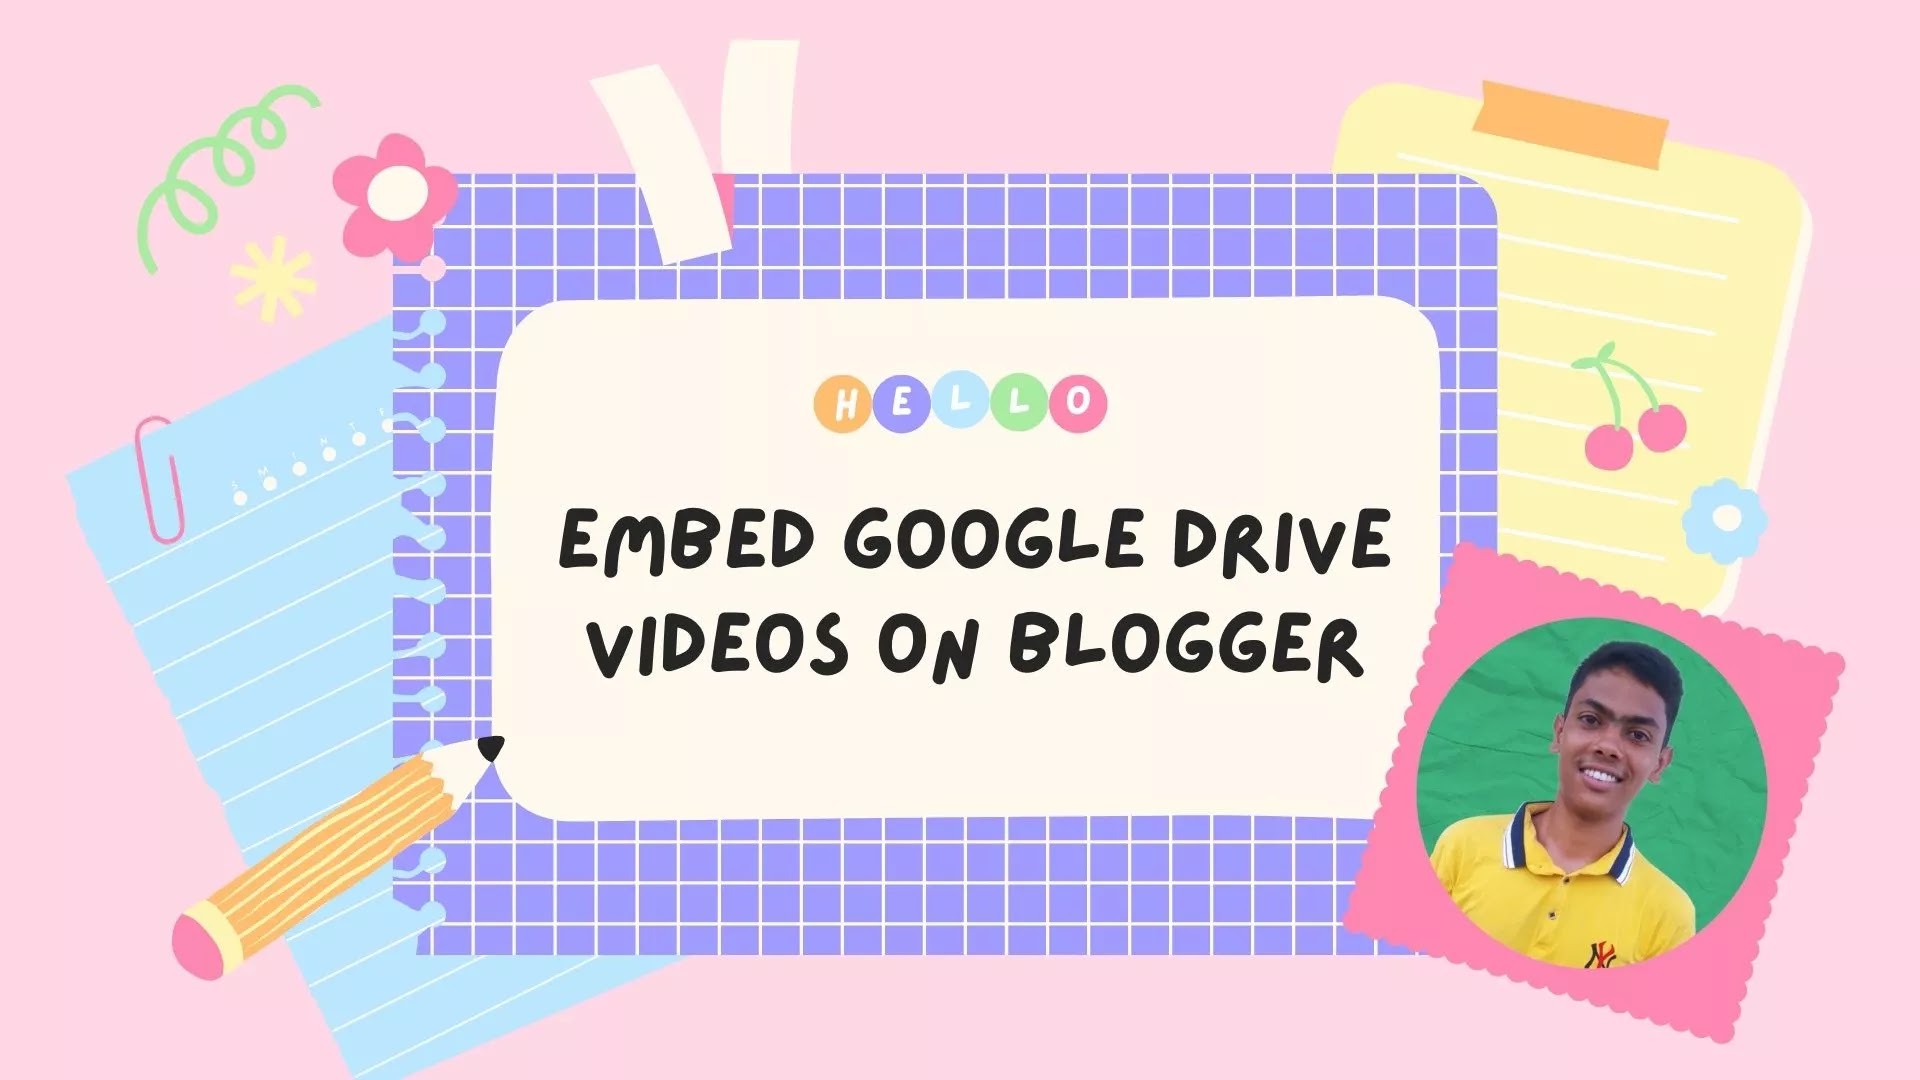 How to embed Google Drive videos on a Blogger site?